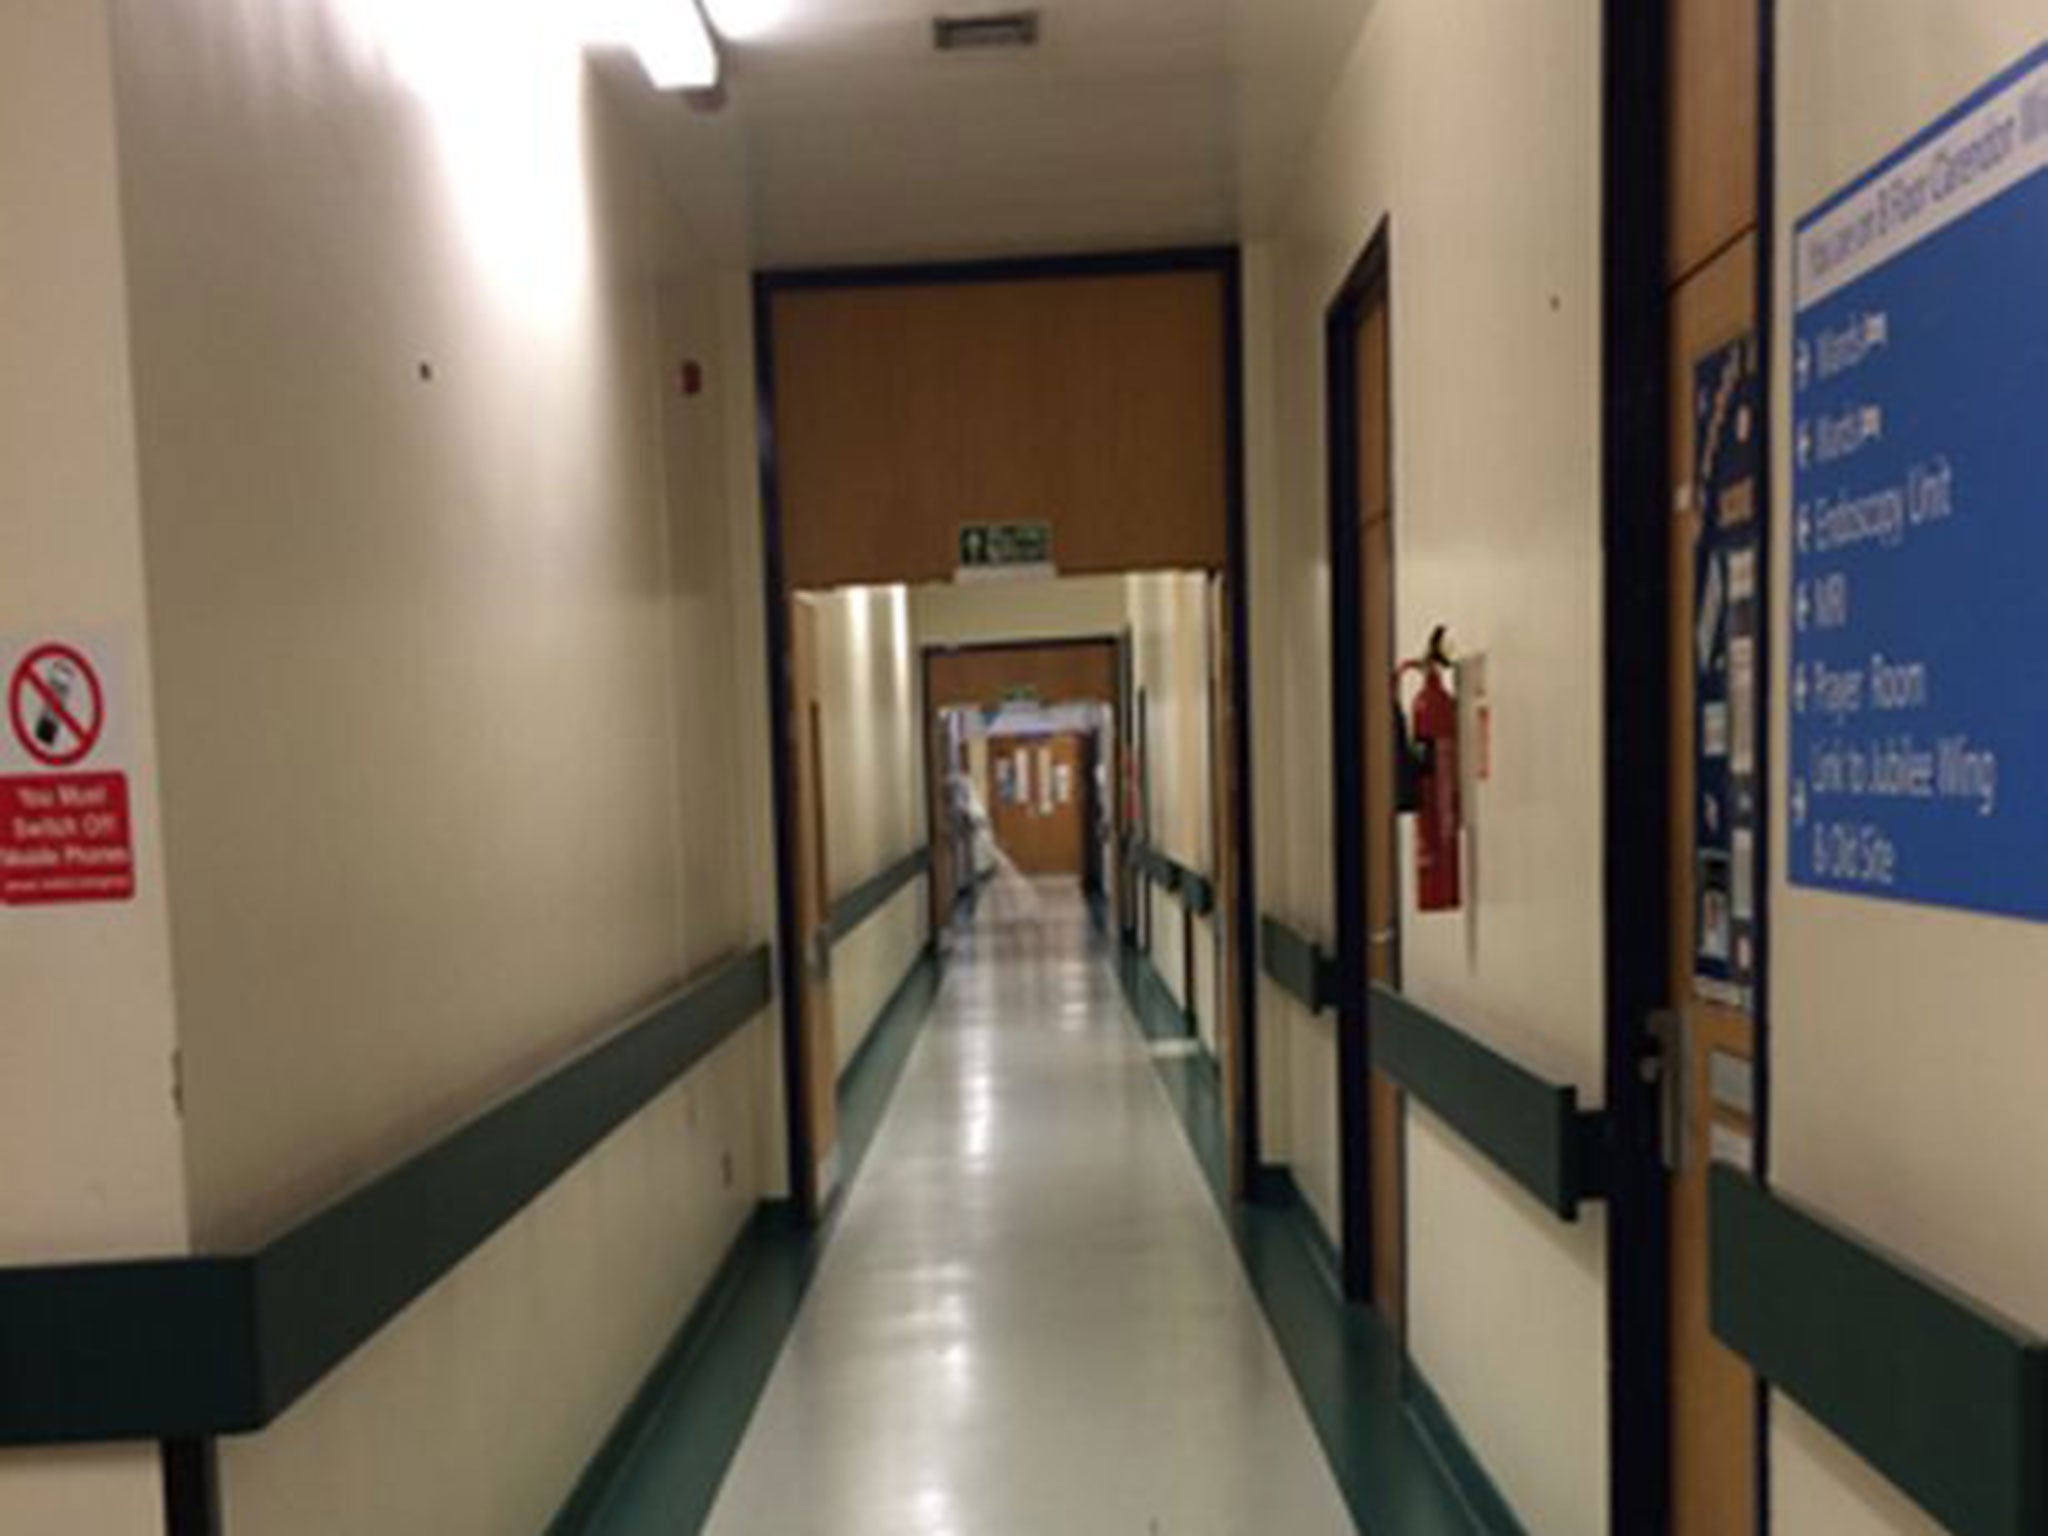 A photo which Andrew Milburn claims shows a ghost walking the halls of Leeds General Infirmary